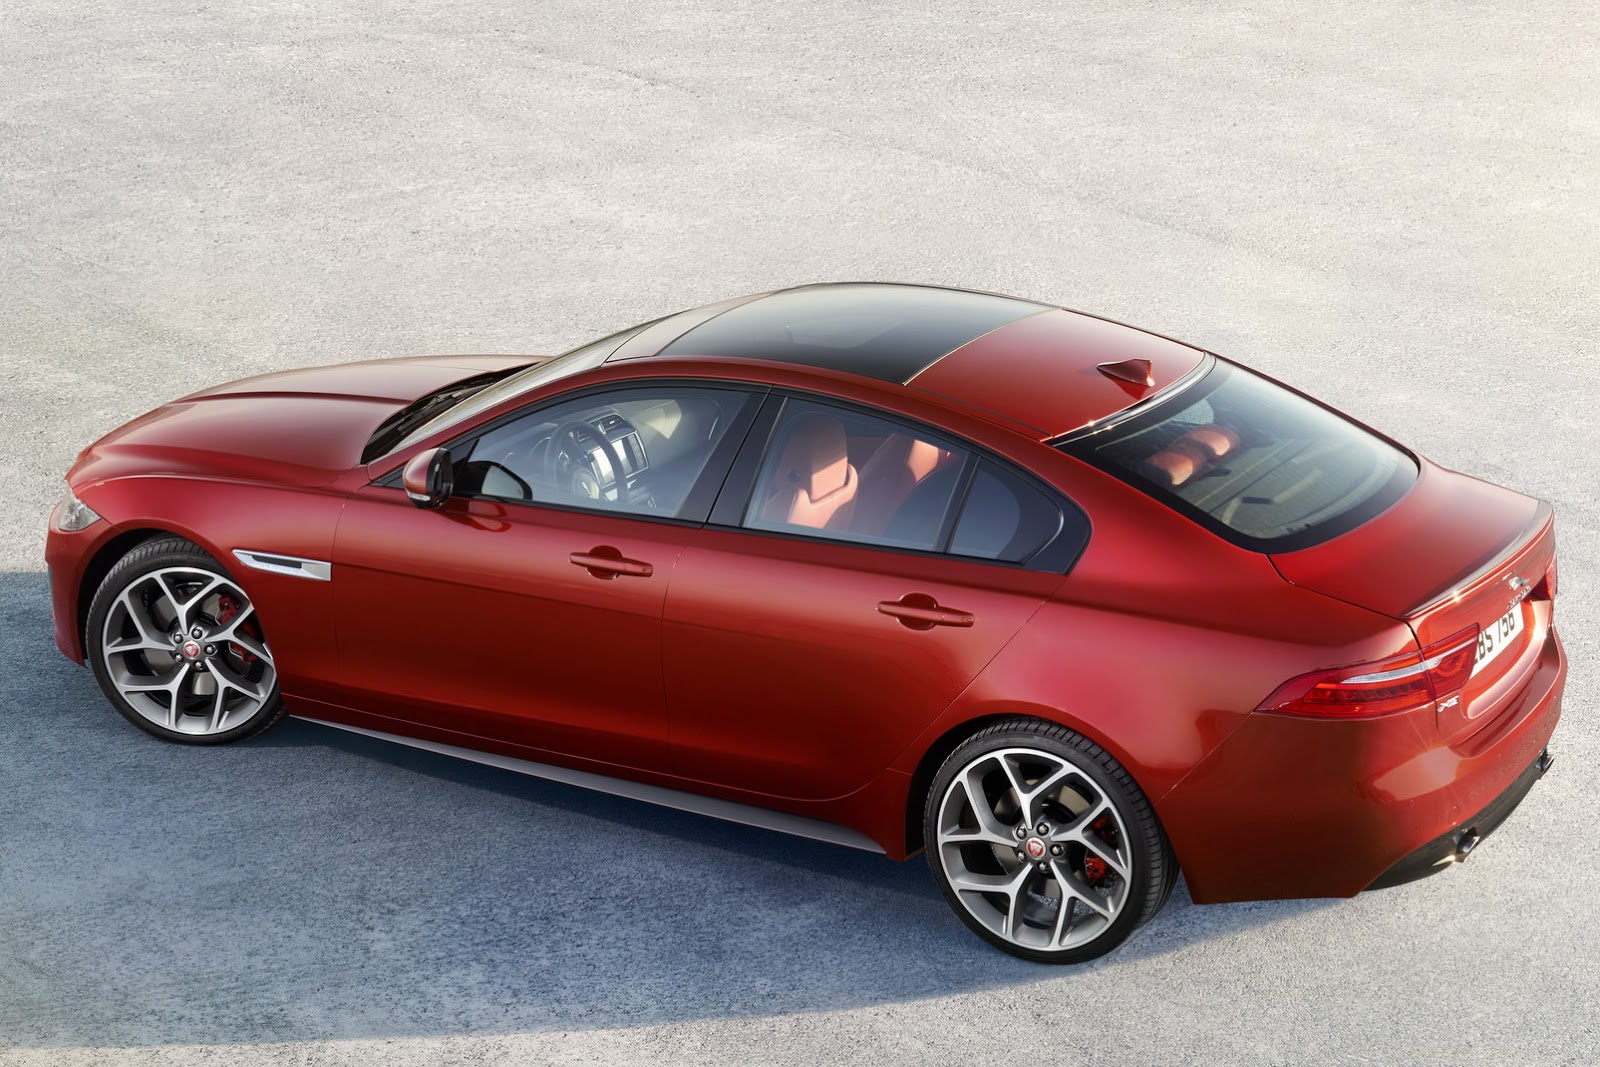 New-2016-Jaguar-XE-officially-revealed-Images-and-details-35